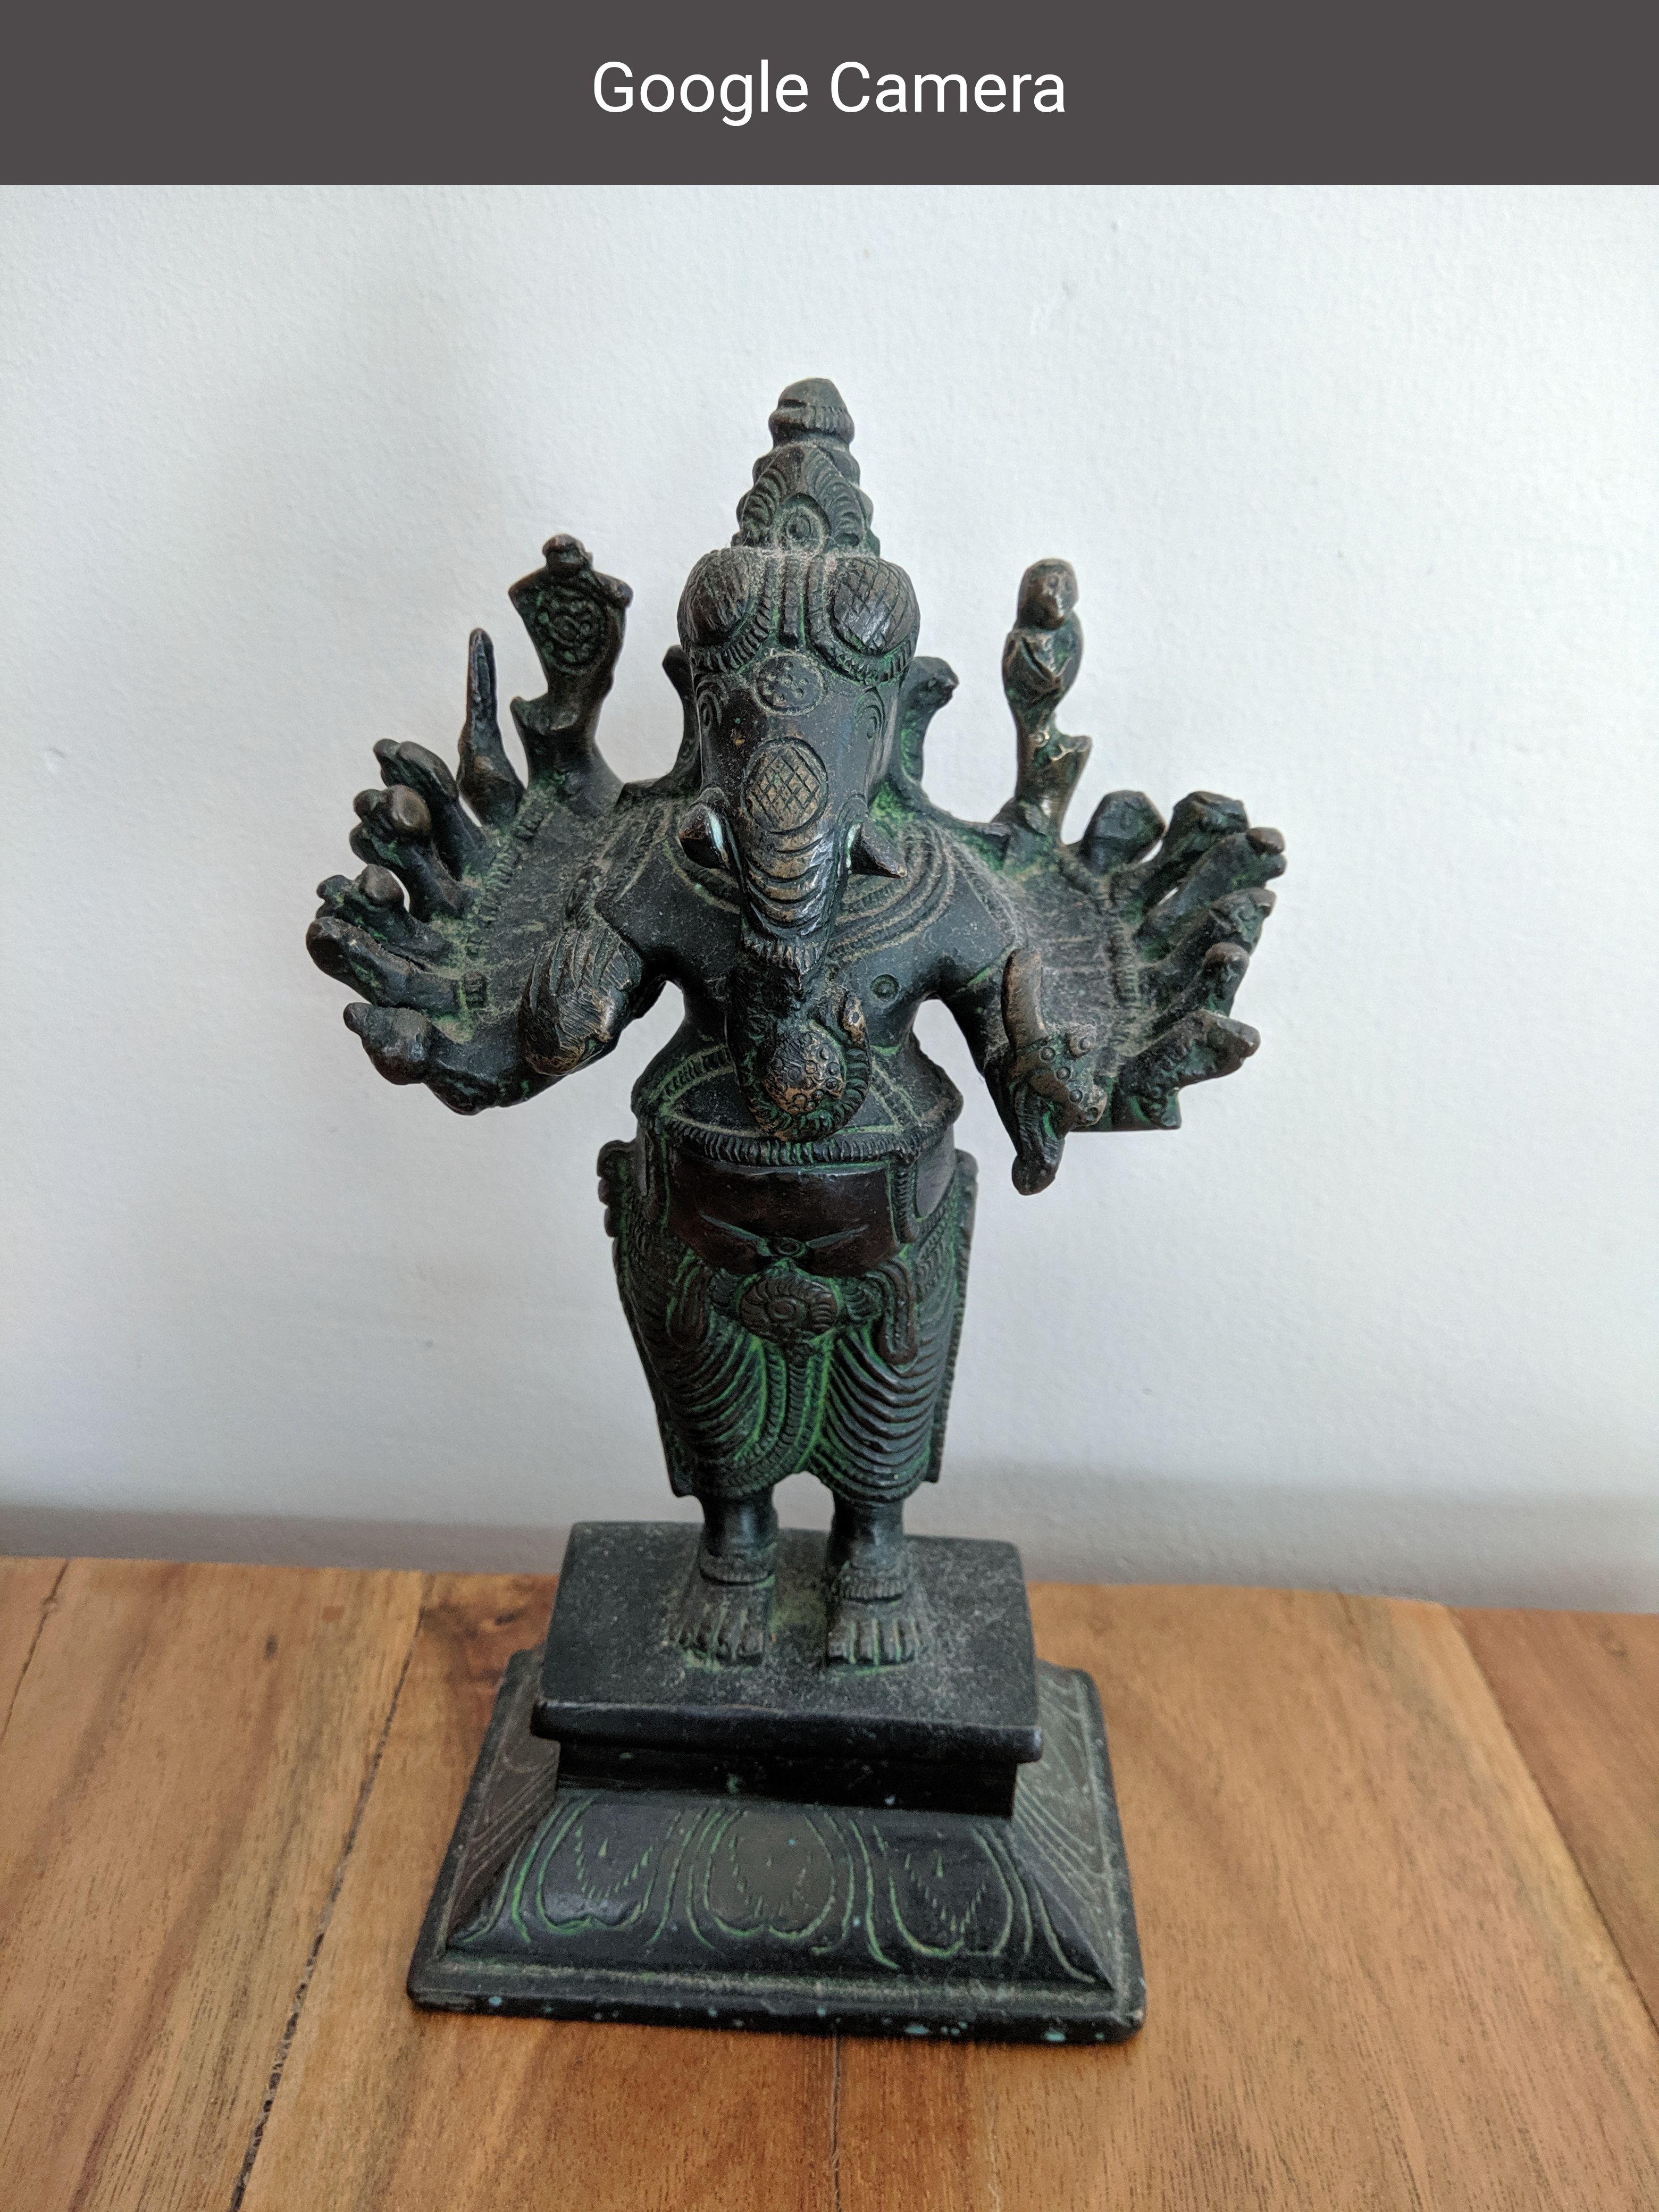 A metallic statue of Lord Ganesha placed on a wooden surface